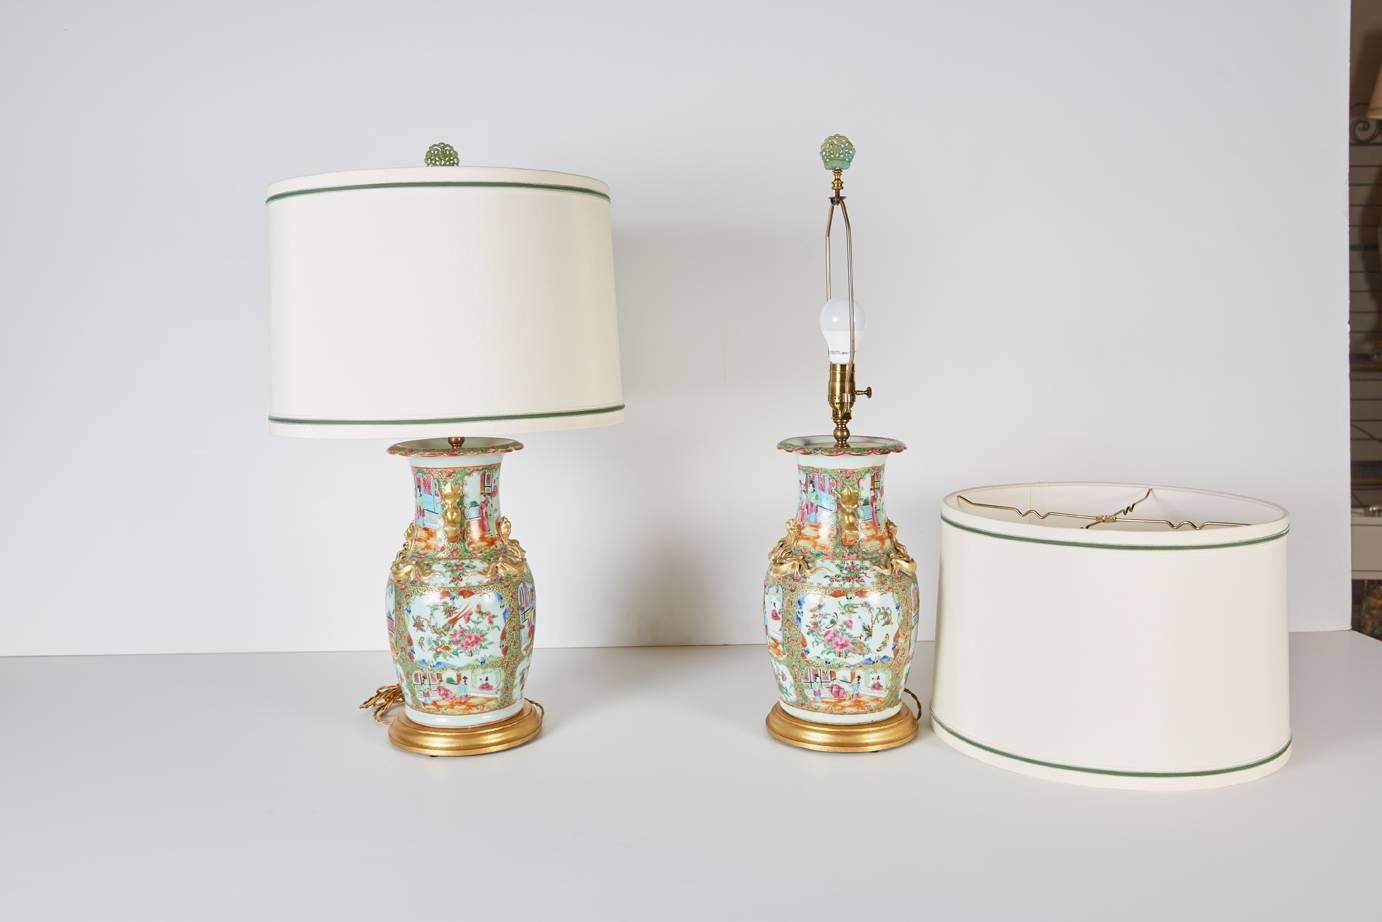 19th Century Pair of Antique Rose Mandarin Vases Newly Mounted as Lamps